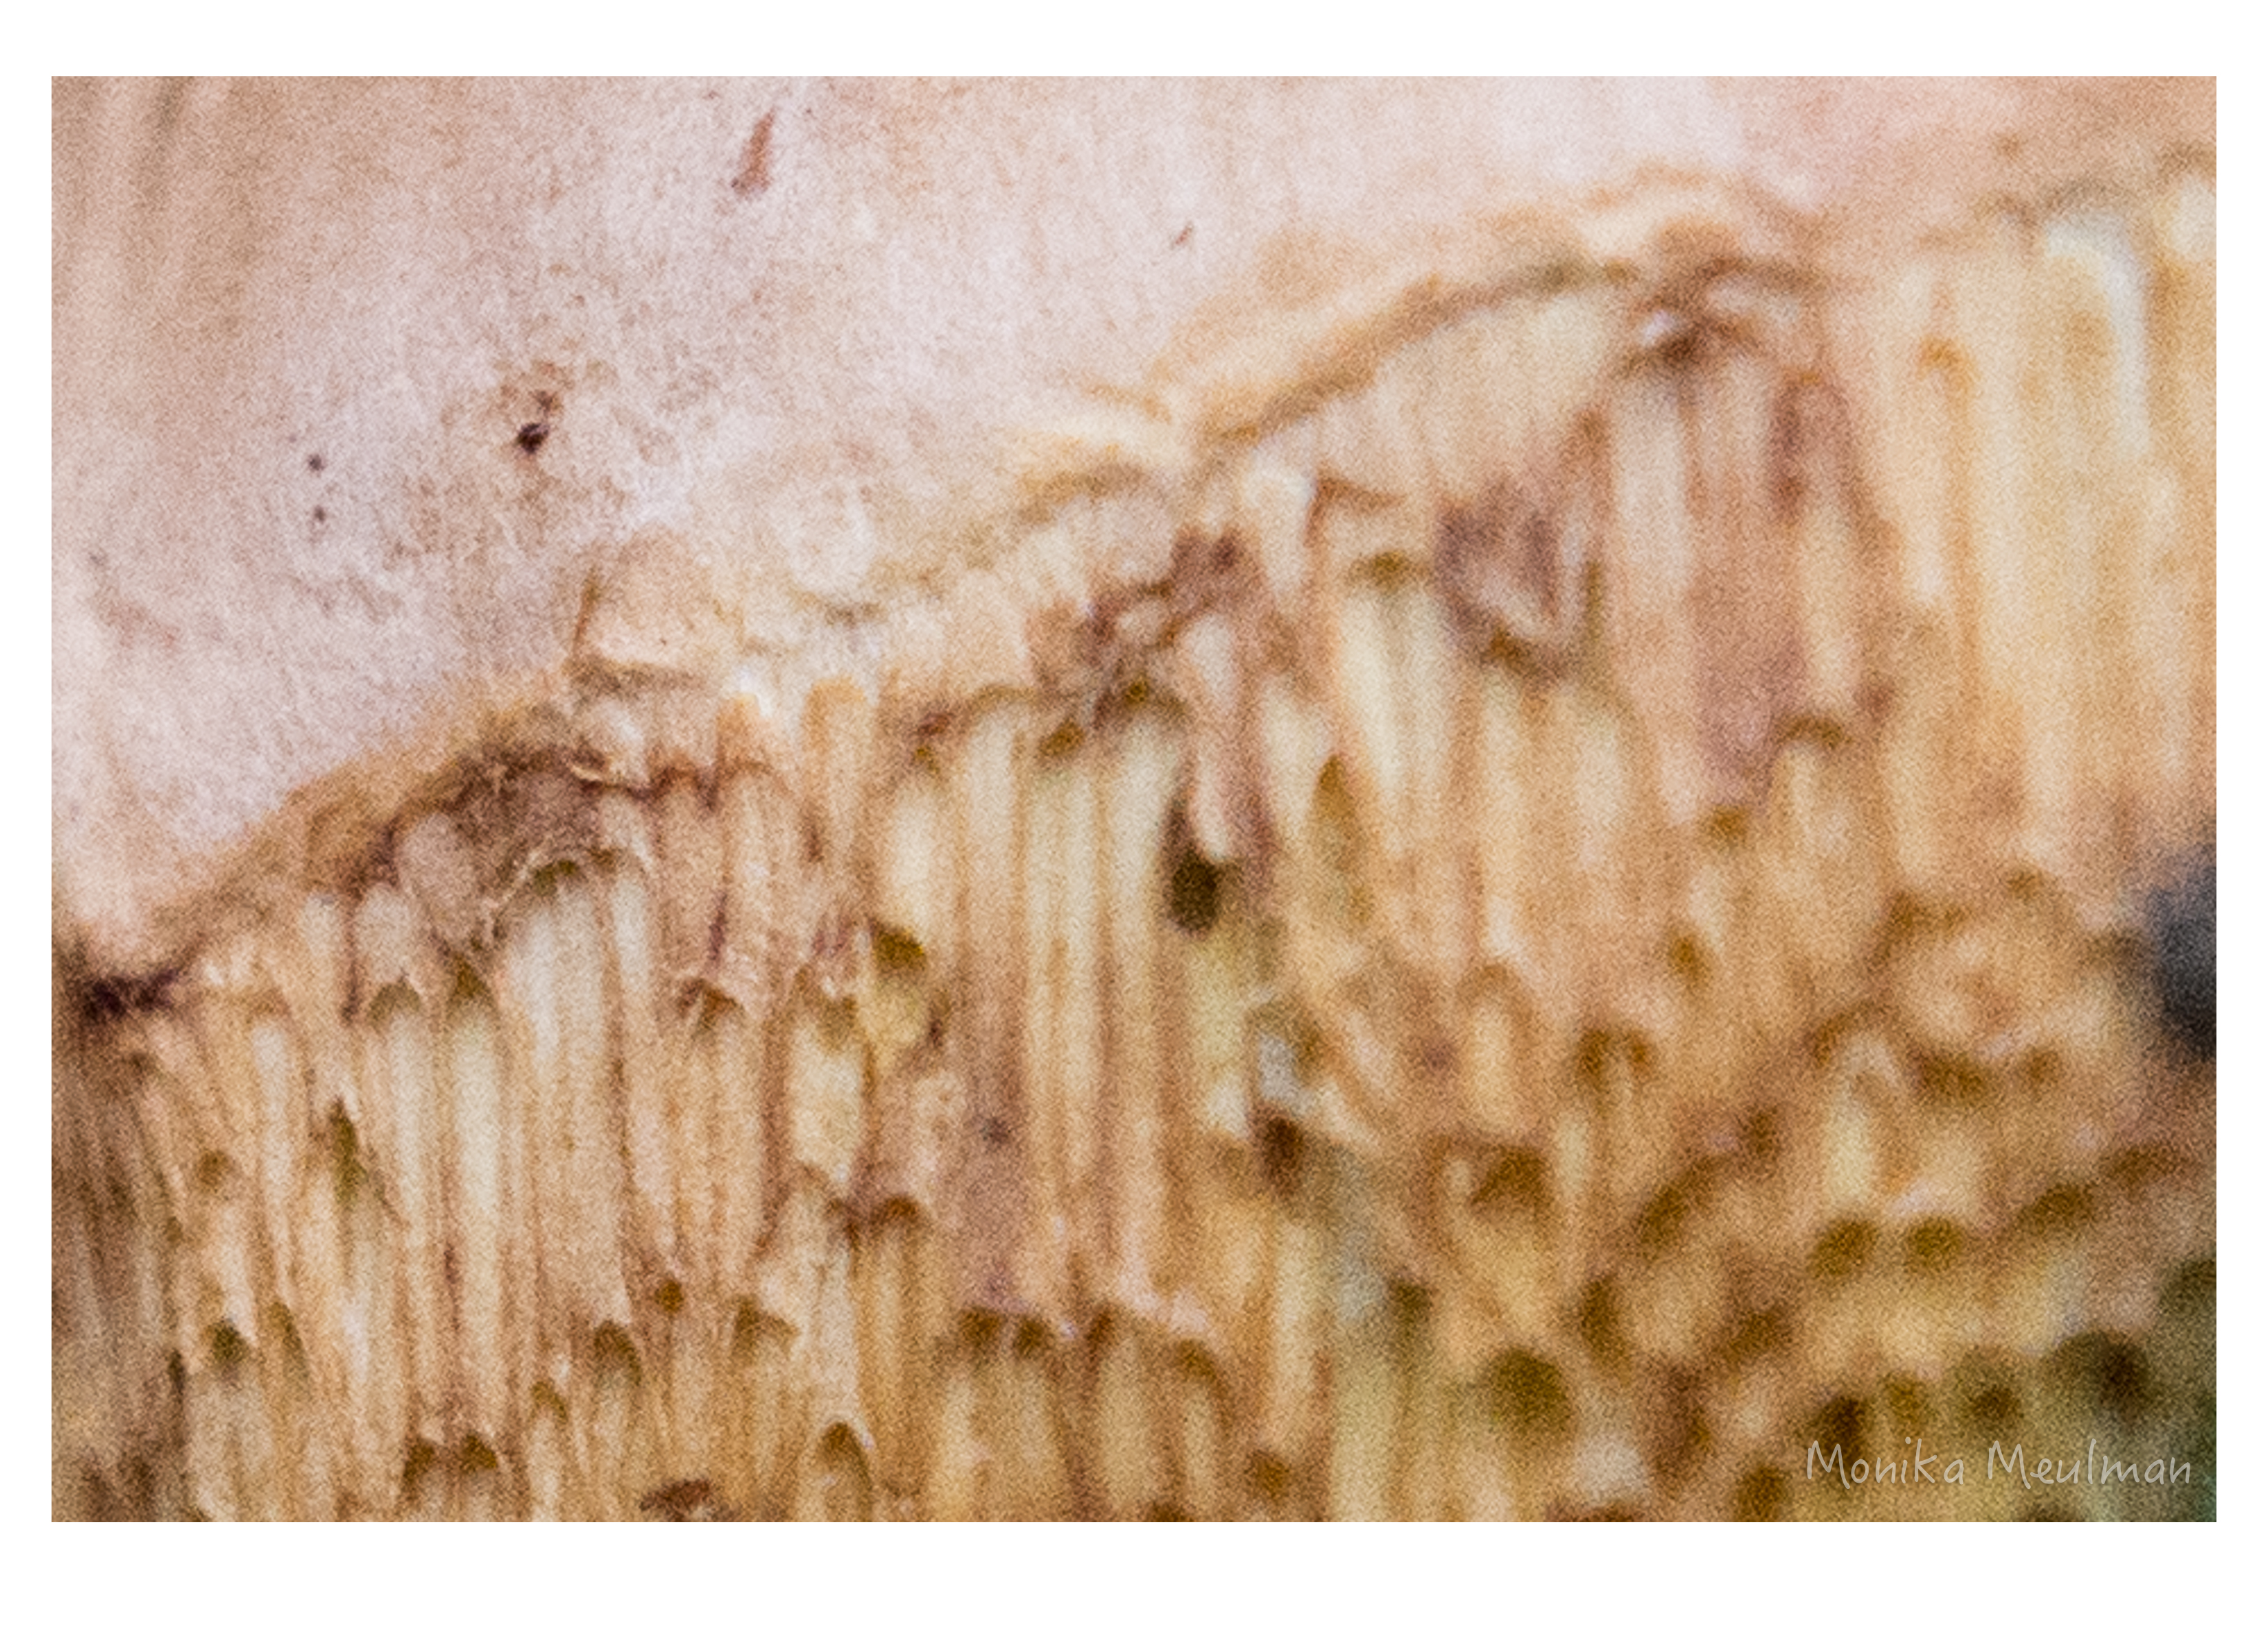 gold of september perception nature photo series exploring the texture of fungi